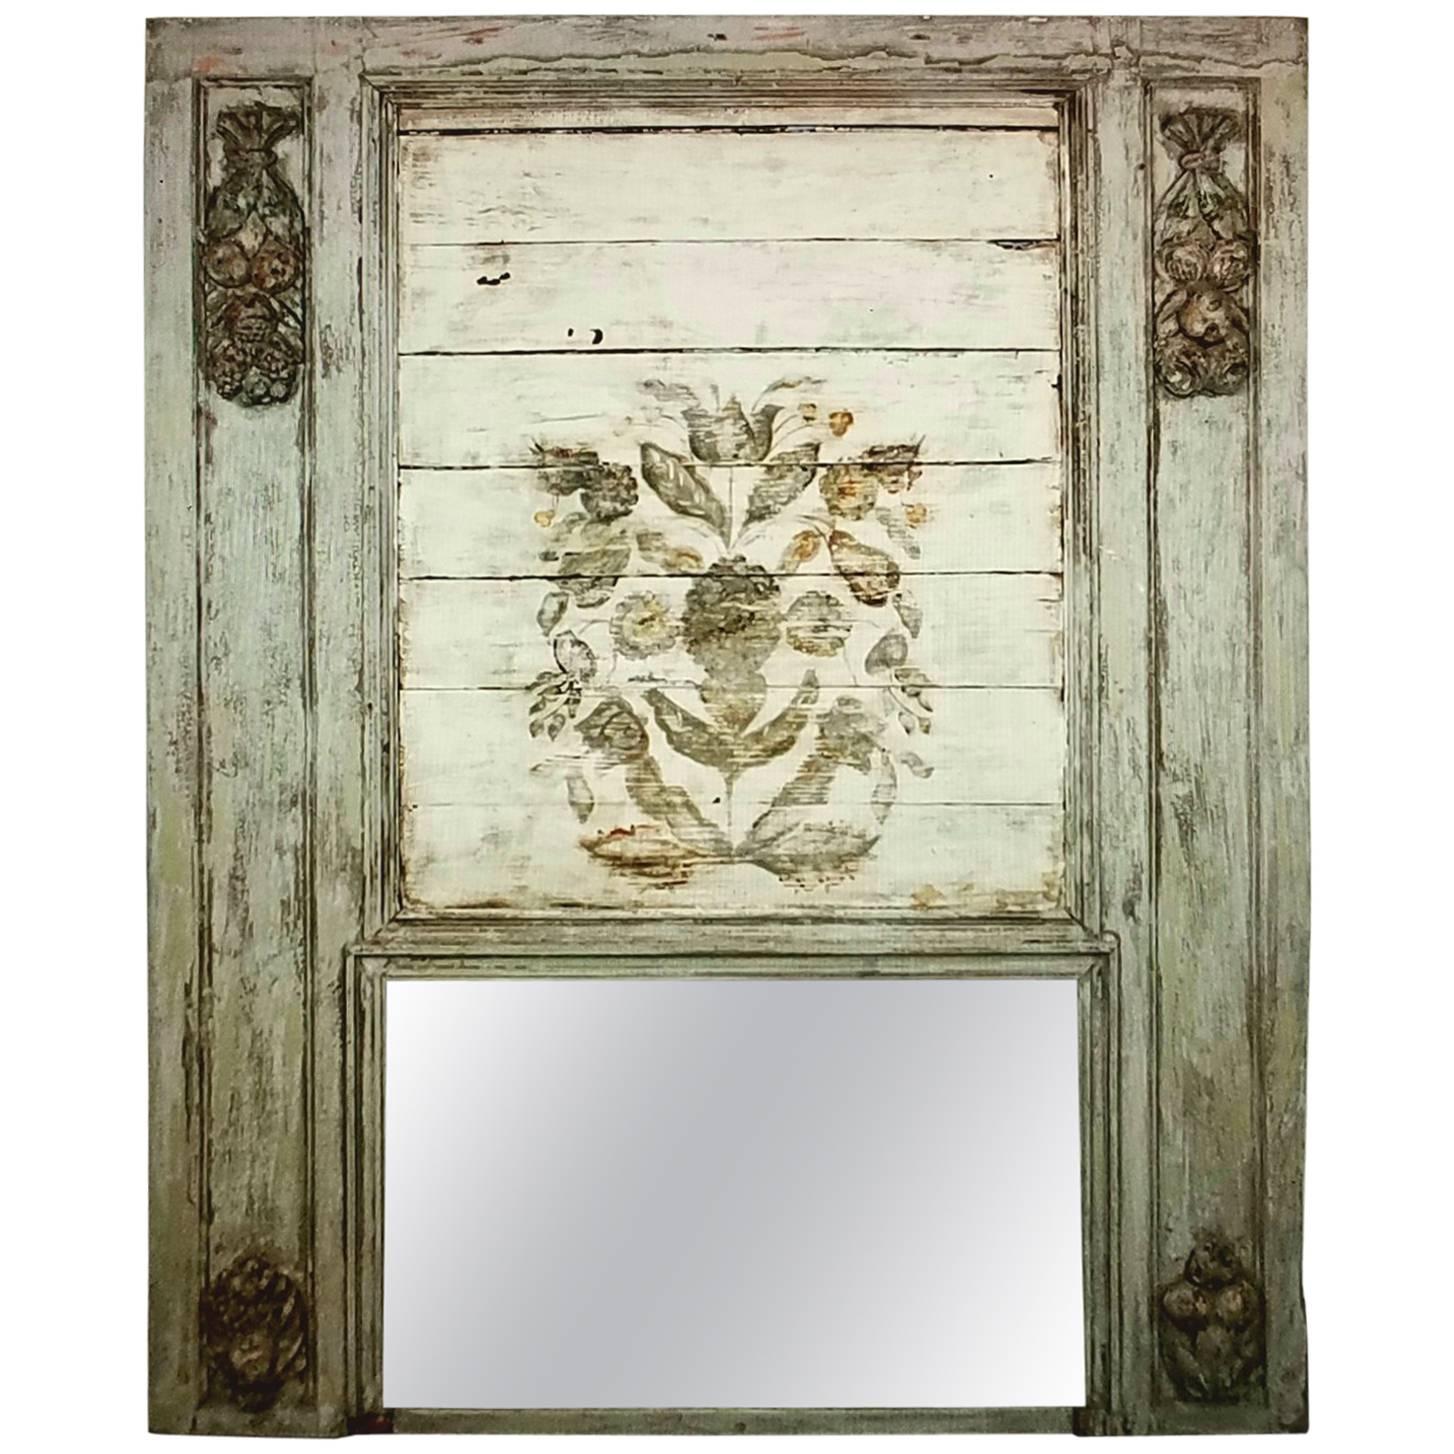 19th Century Painted French Trumeau Mirror with Fruit Swags and Painted Florals